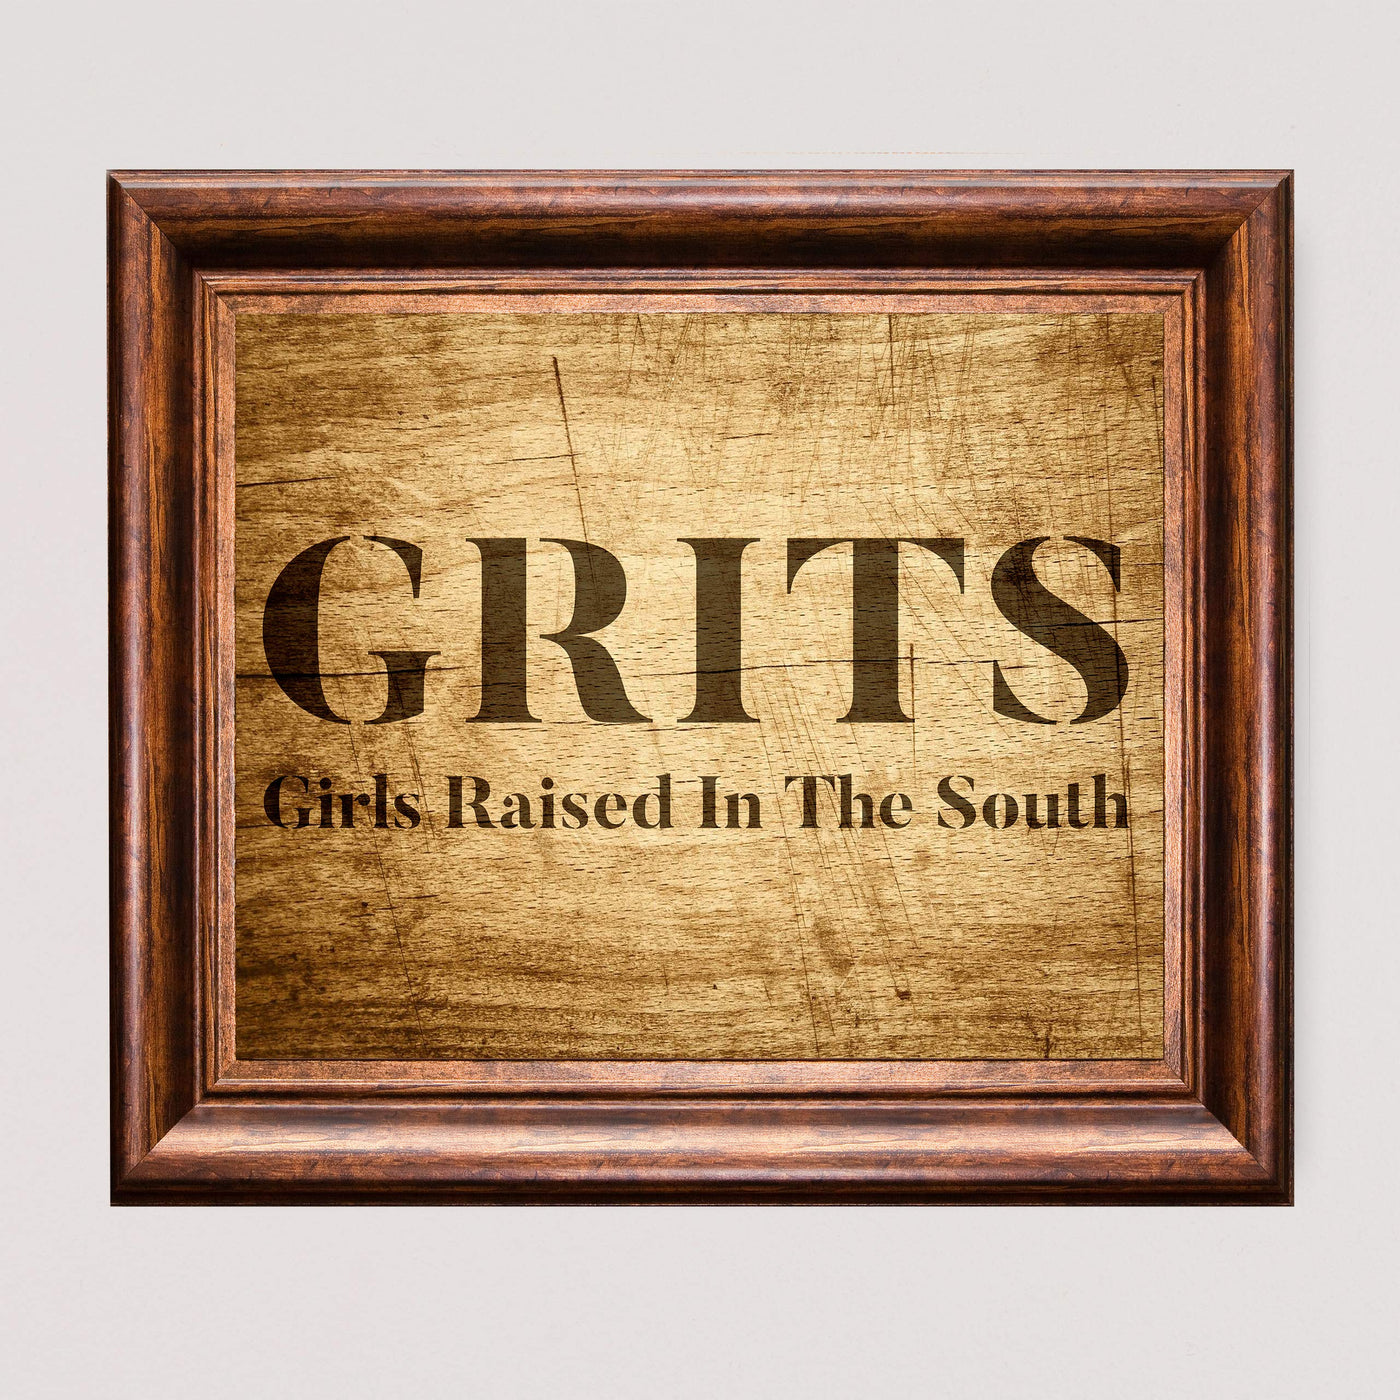 GRITS-Girls Raised In The South-Funny Wall Art Decor -10 x 8" Country Rustic Southern Print w/Replica Distressed Wood Design-Ready to Frame. Home-Office-Bar-Cave-Dorm Decor. Printed on Photo Paper.